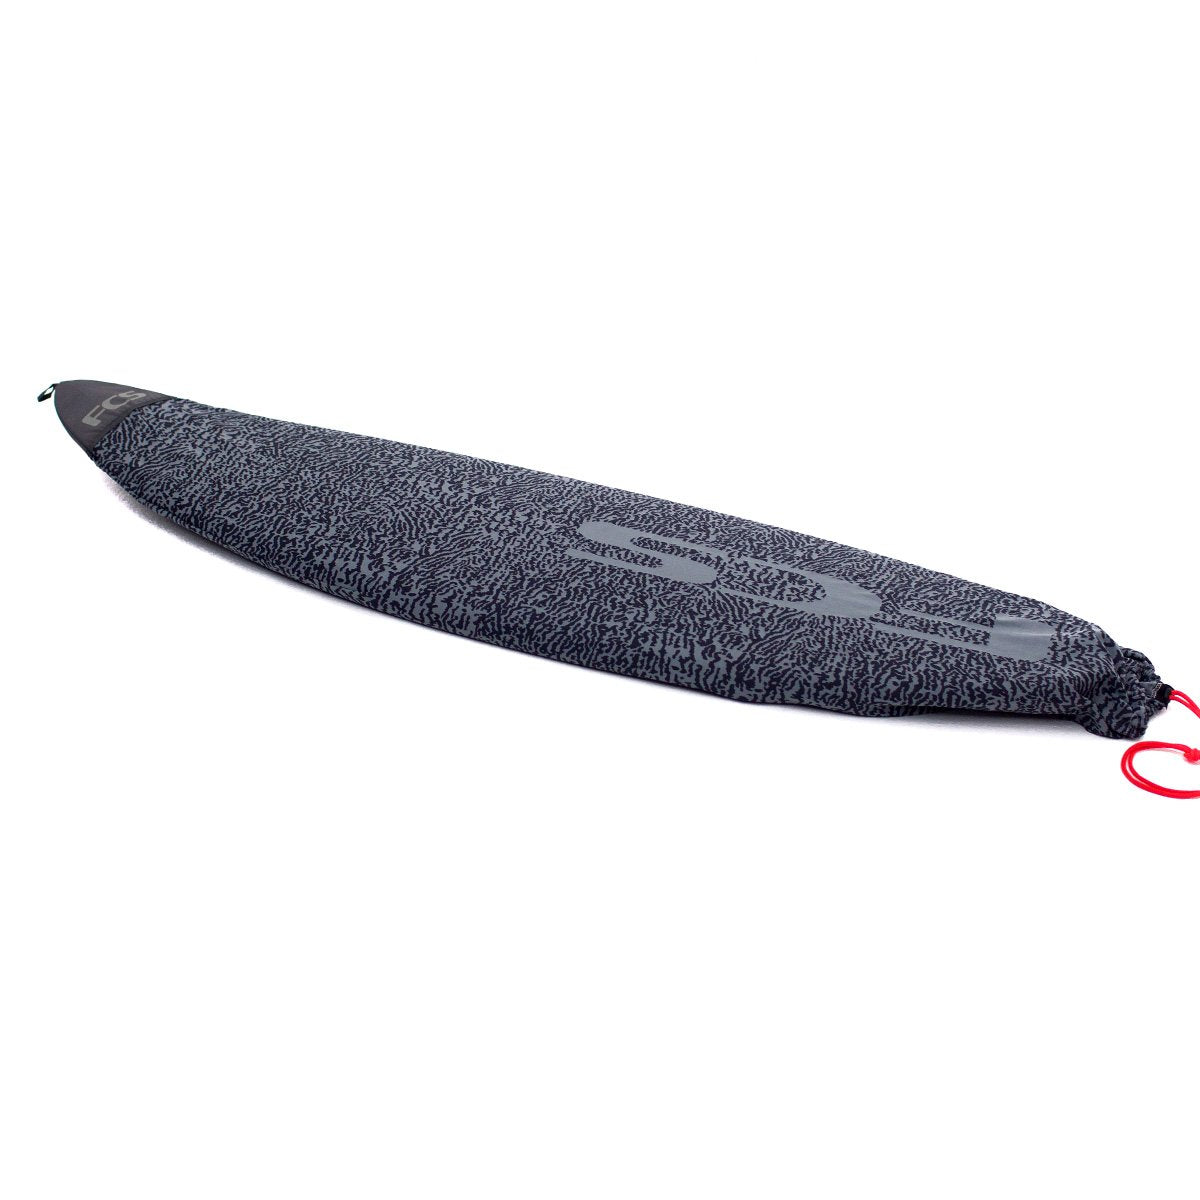 9'0" FCS Stretch Long Board Cover Carbon